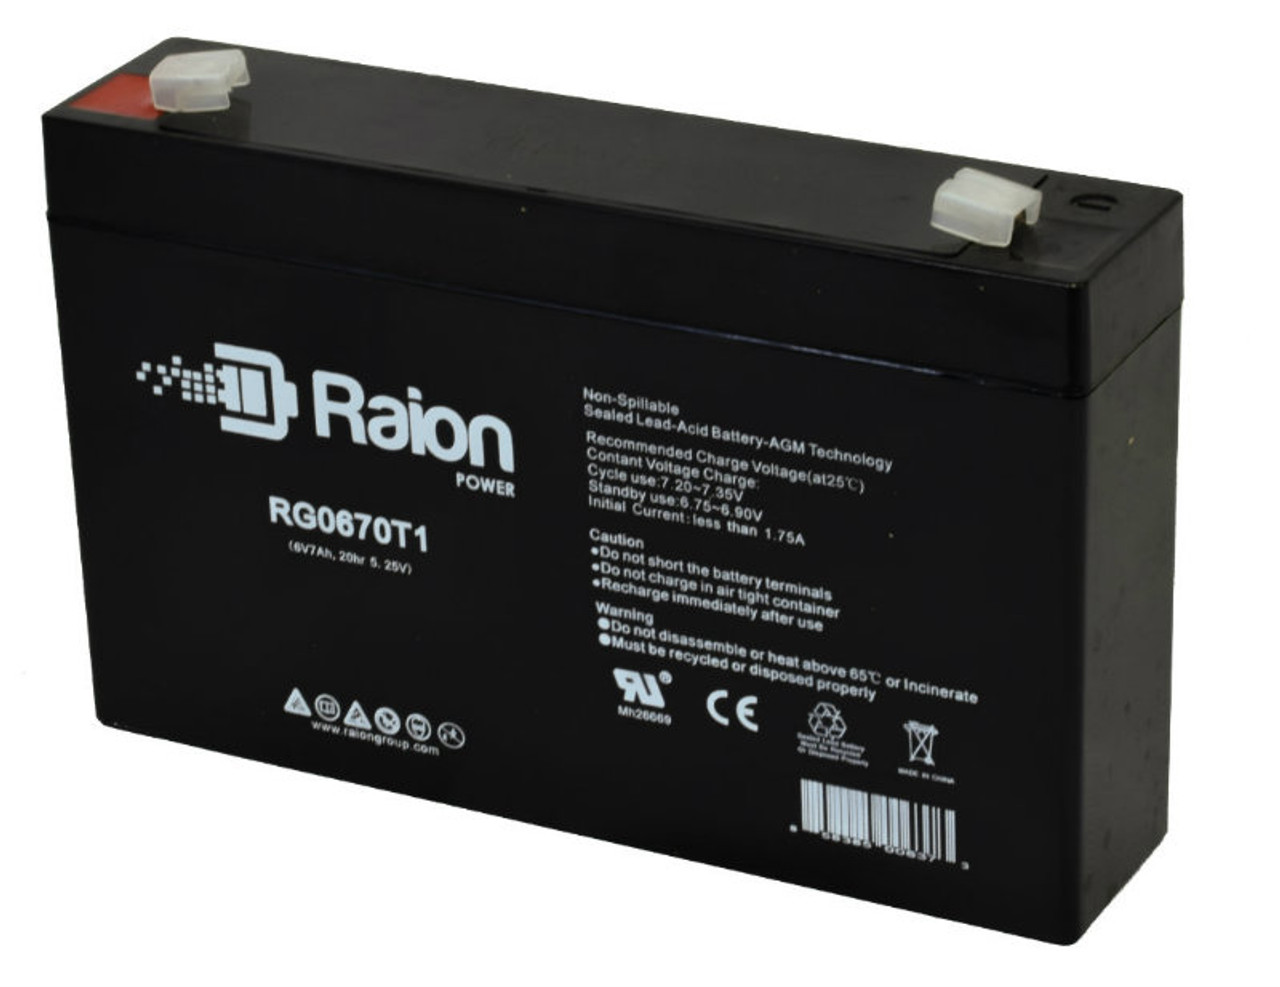 Raion Power RG0670T1 6V 7Ah Replacement Emergency Lighting Battery for Sure-Lites SL2645